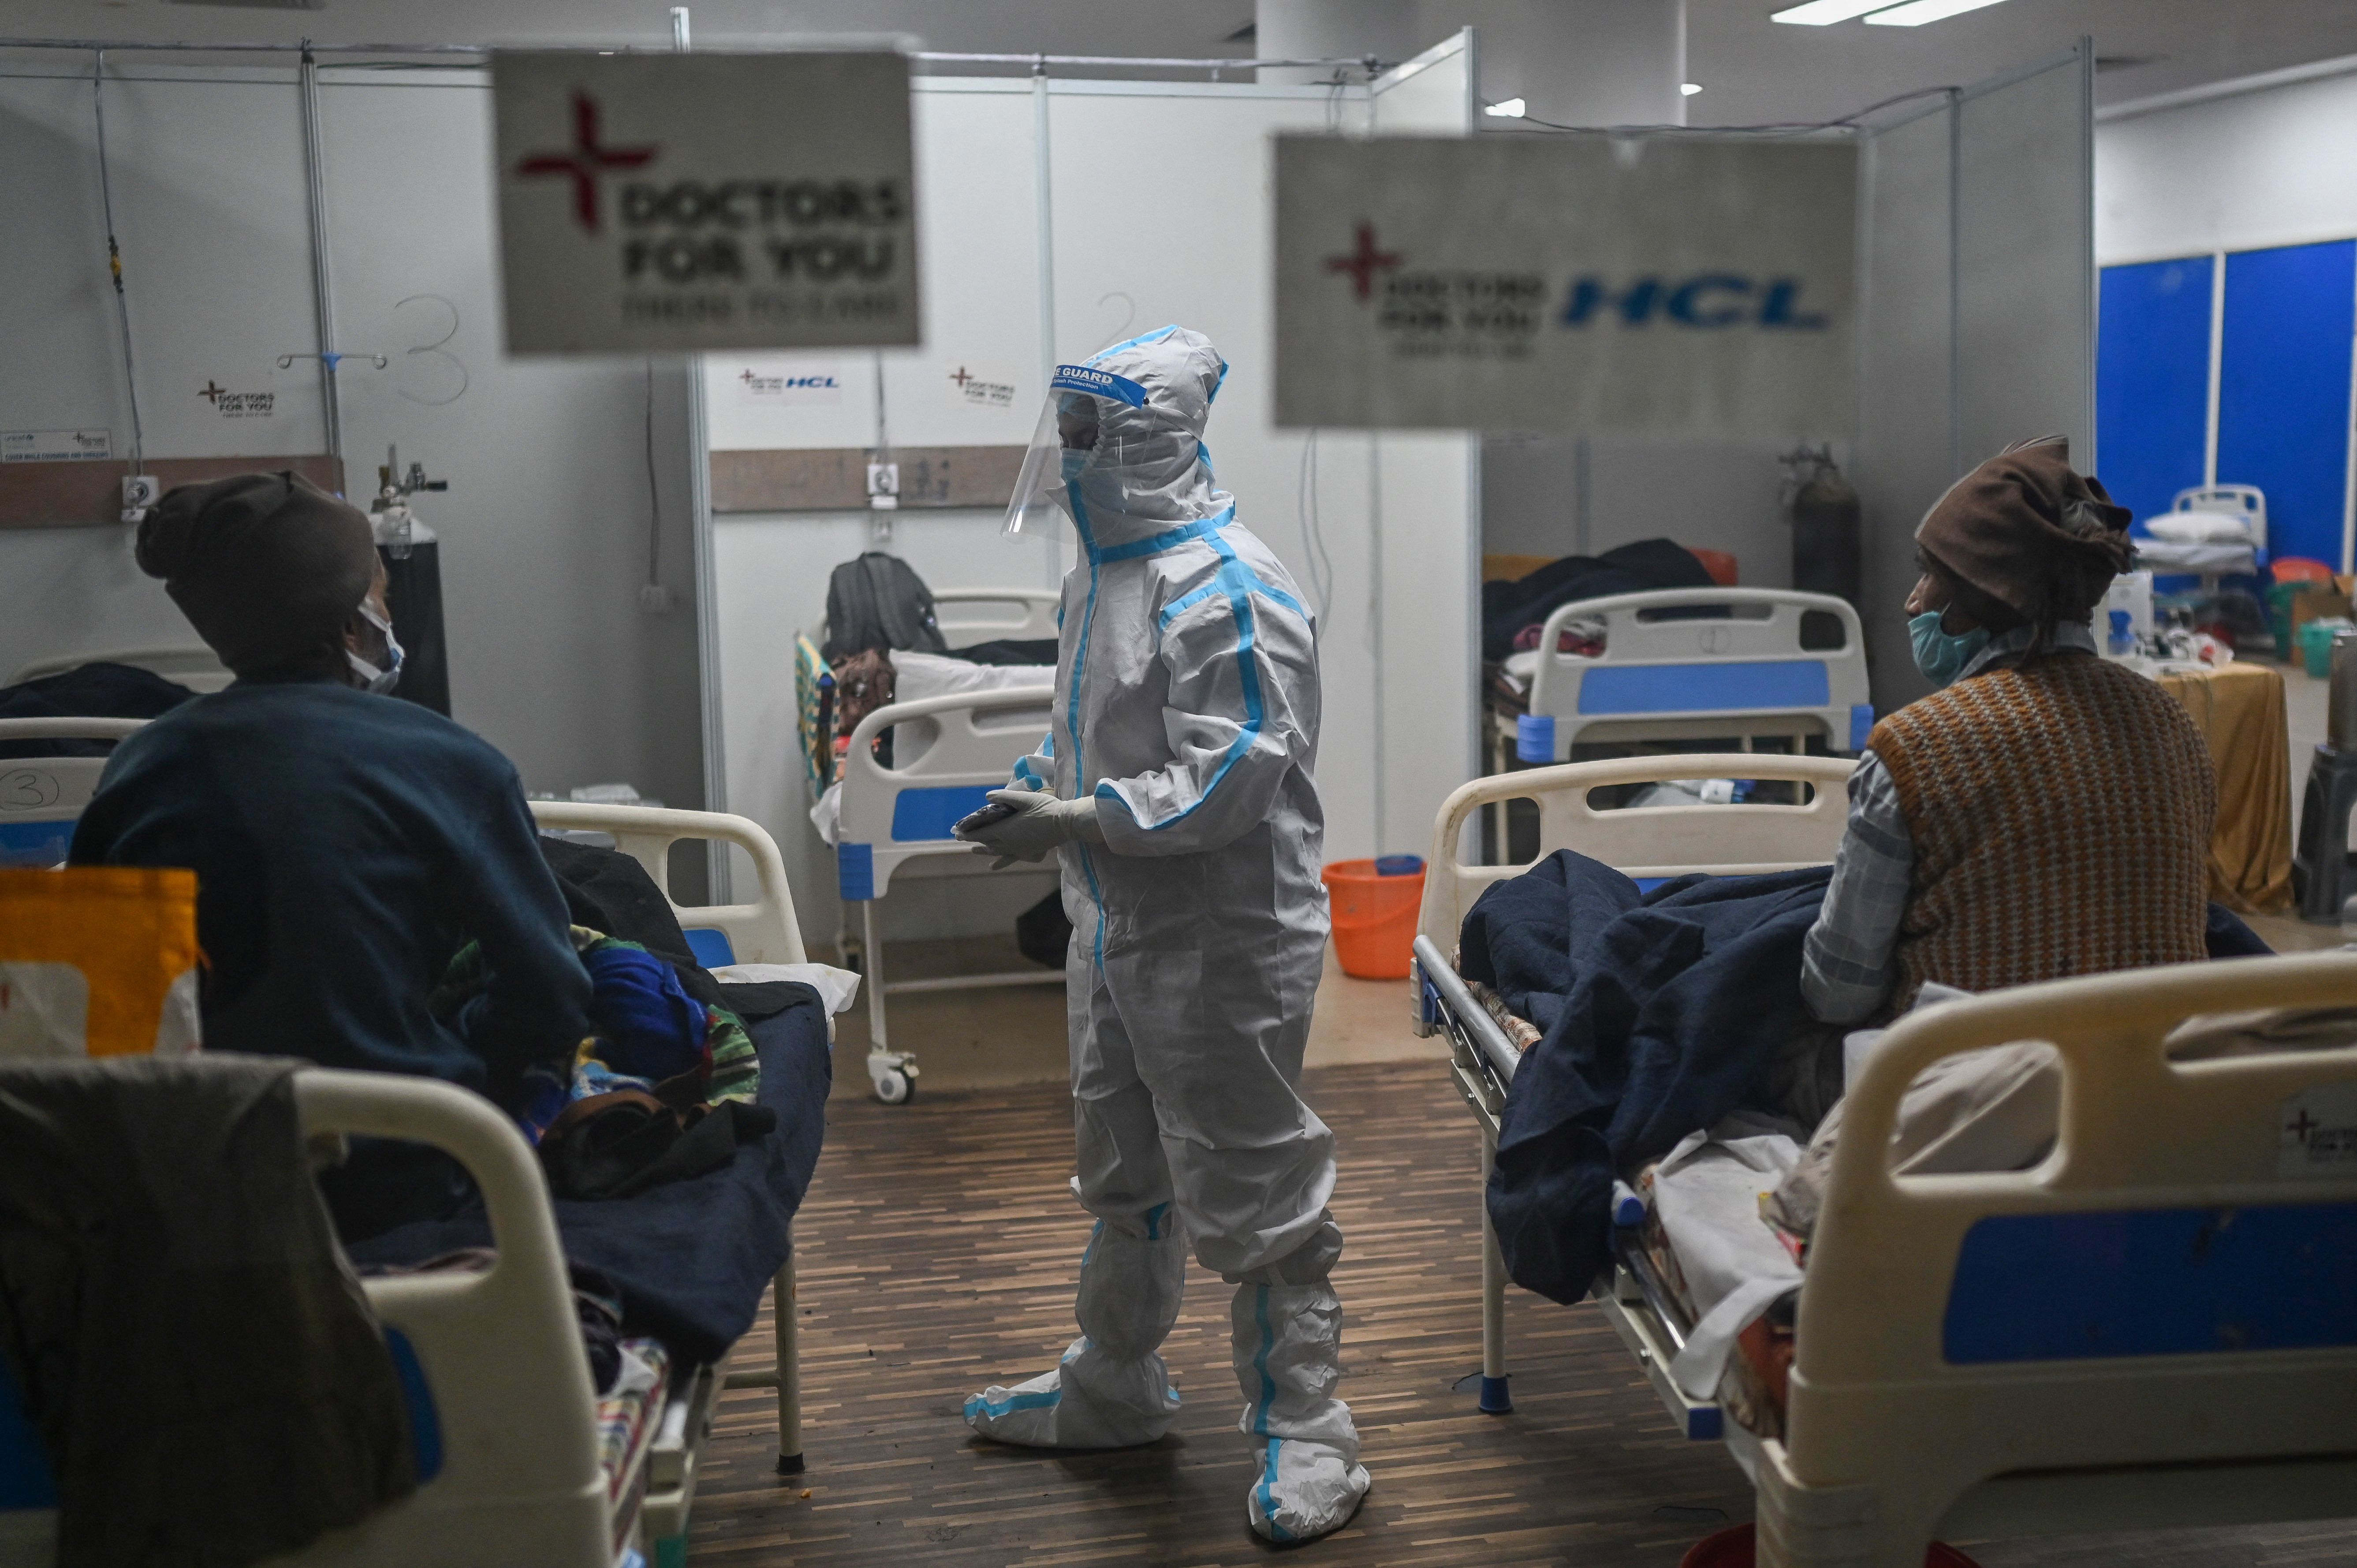 A health worker wearing Personal Protective Equipment (PPE) suit interacts with patients inside a ward at the Commonwealth games (CWG) village sports complex, temporarily converted into Covid-19 coronavirus care centre, in New Delhi on January 5, 2022. 